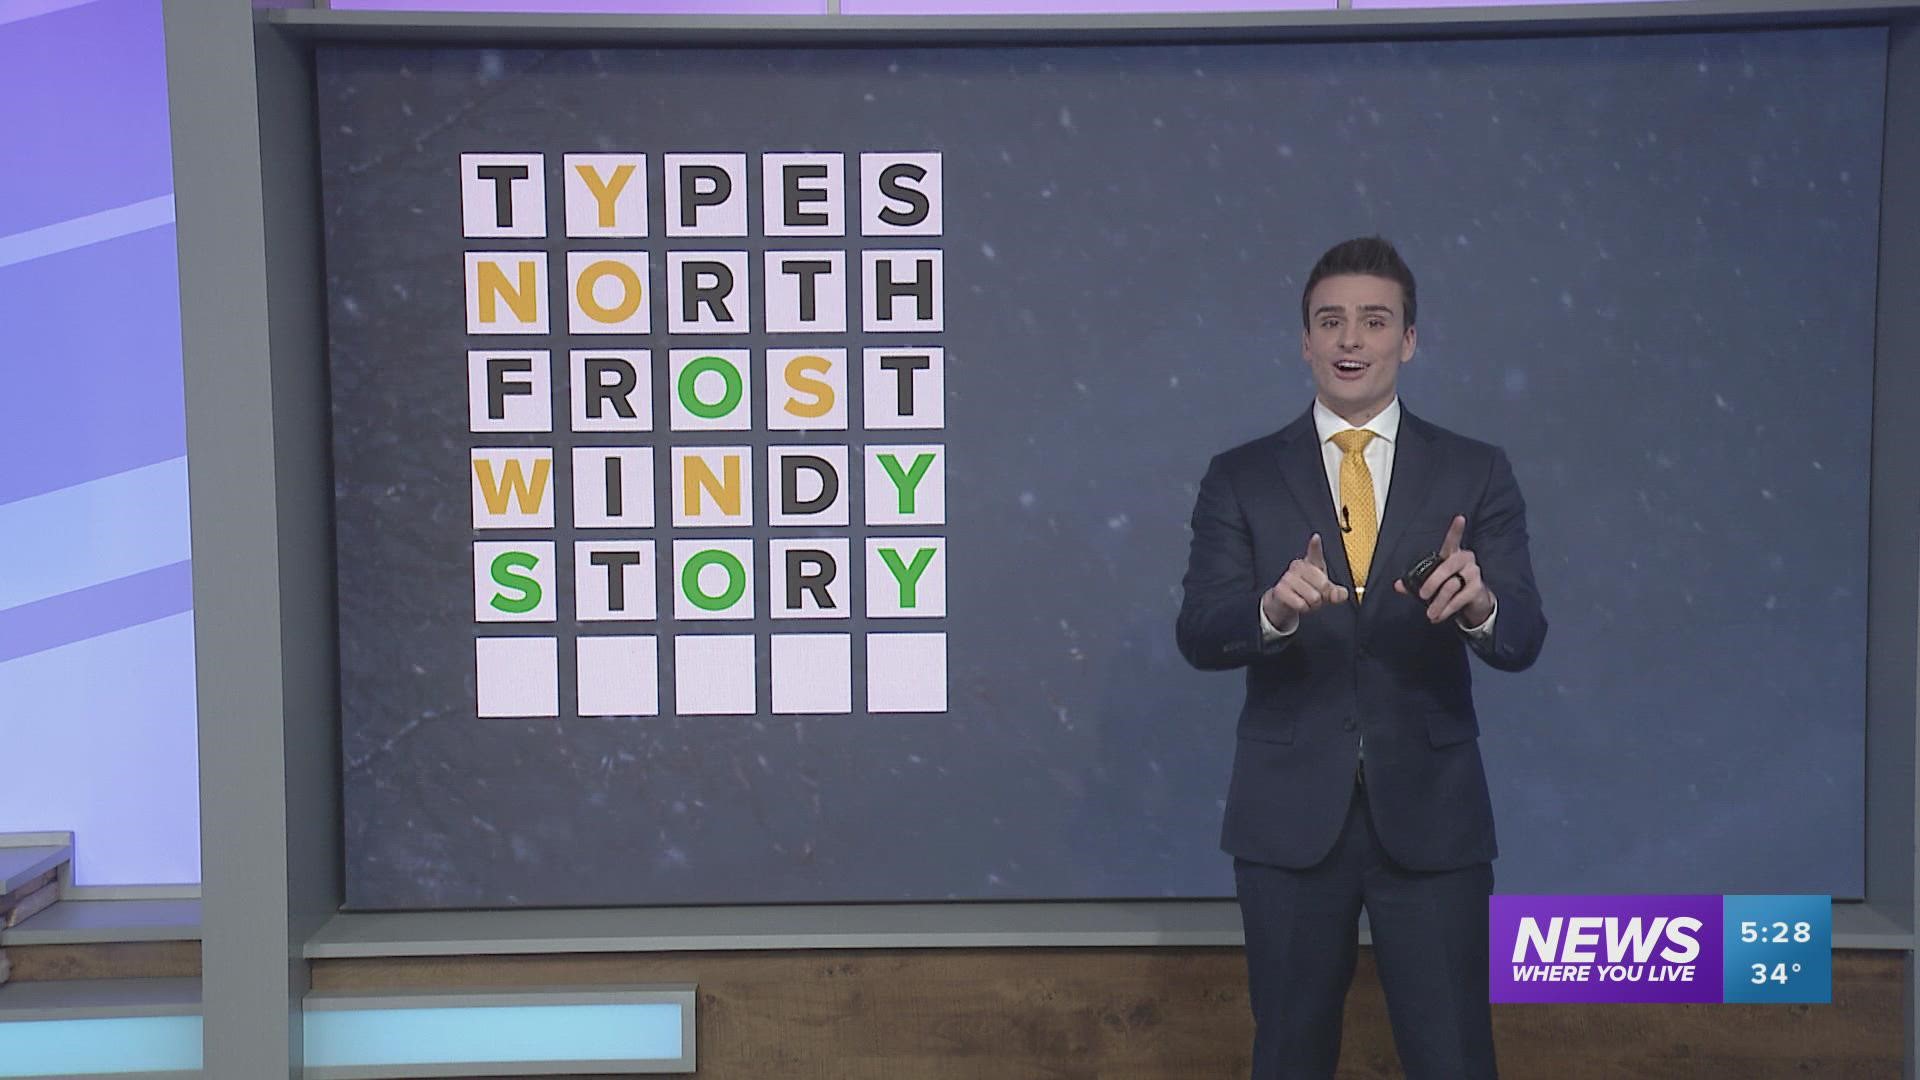 Have you tried playing the popular word puzzle game "Wordle"? 5NEWS Meteorologist Matt Standridge made a weather Wordle to deliver the forecast for Arkansas.